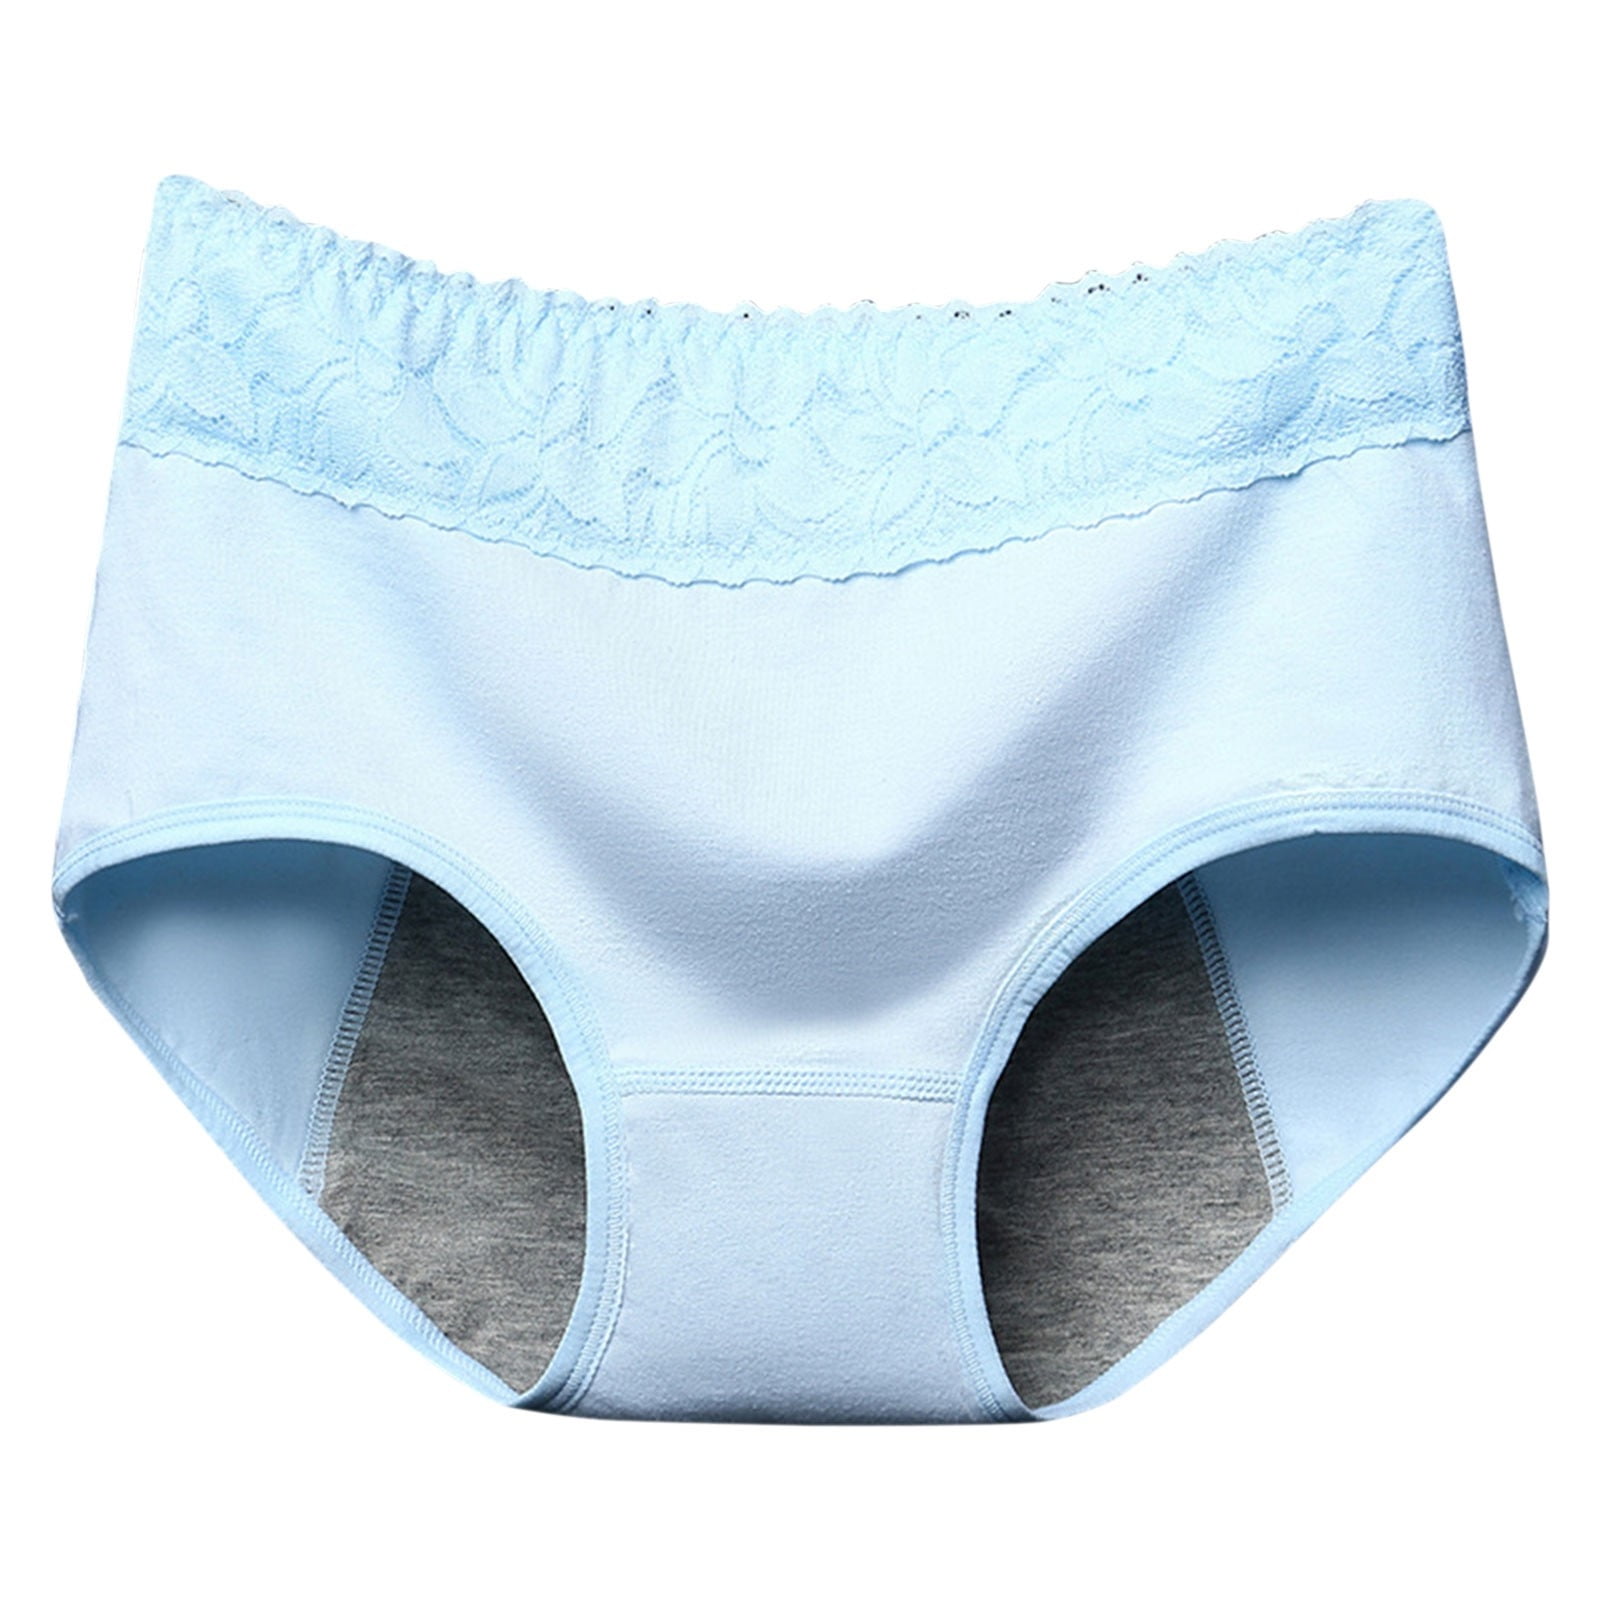 Women'S Physiological Pants Anti Side Leakage Cotton Panties Mid